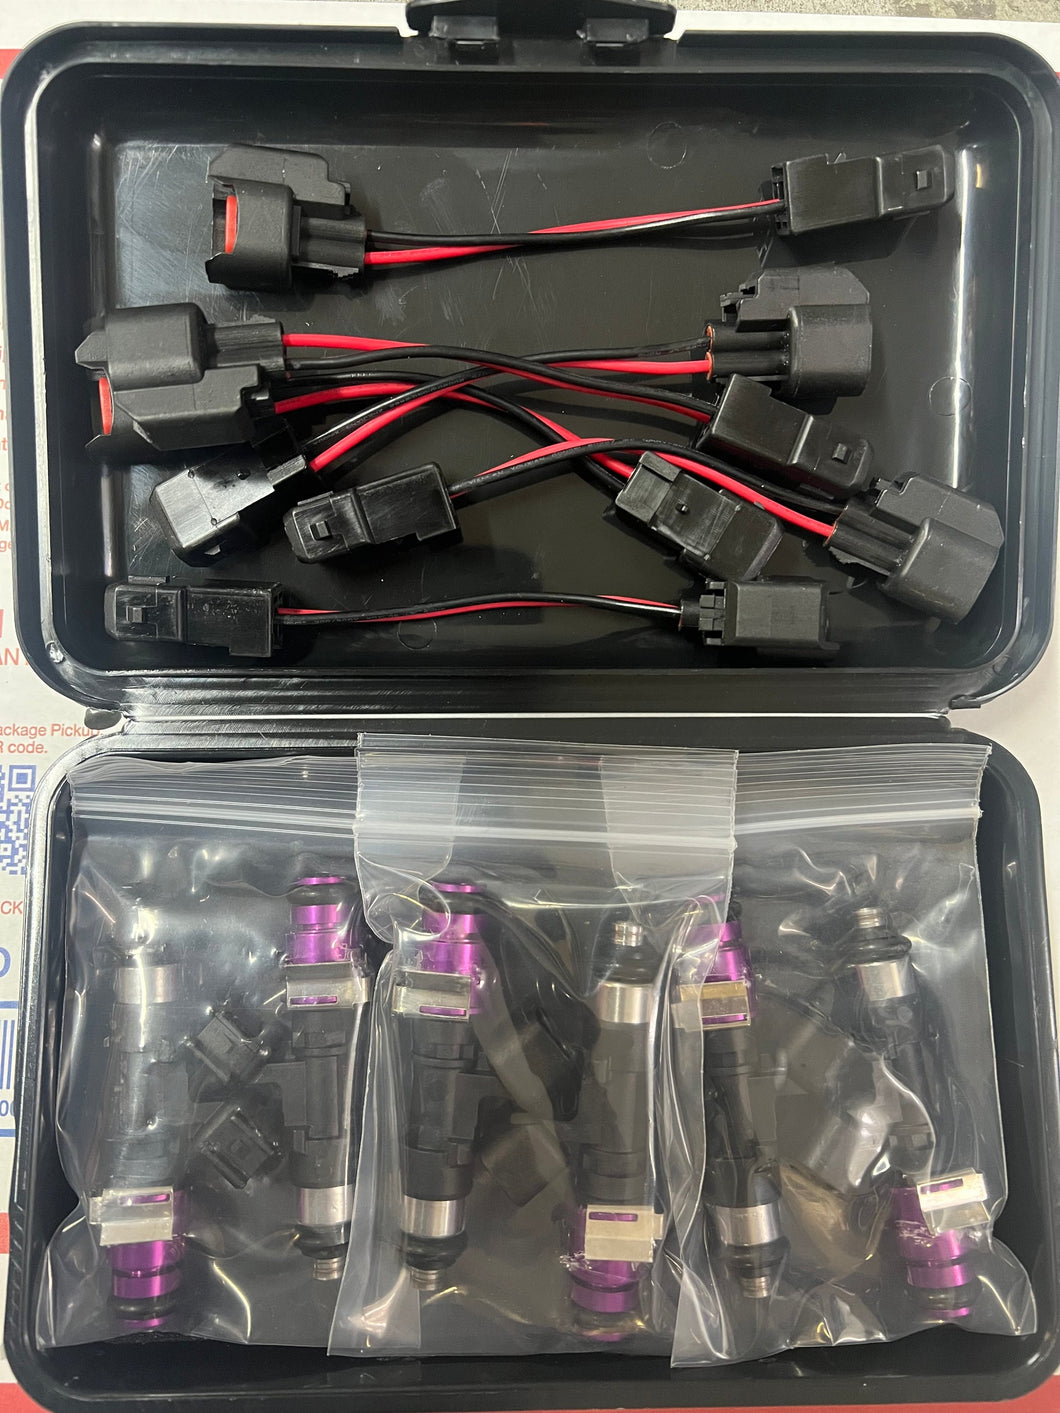 630 cc multi port injectors with adapters